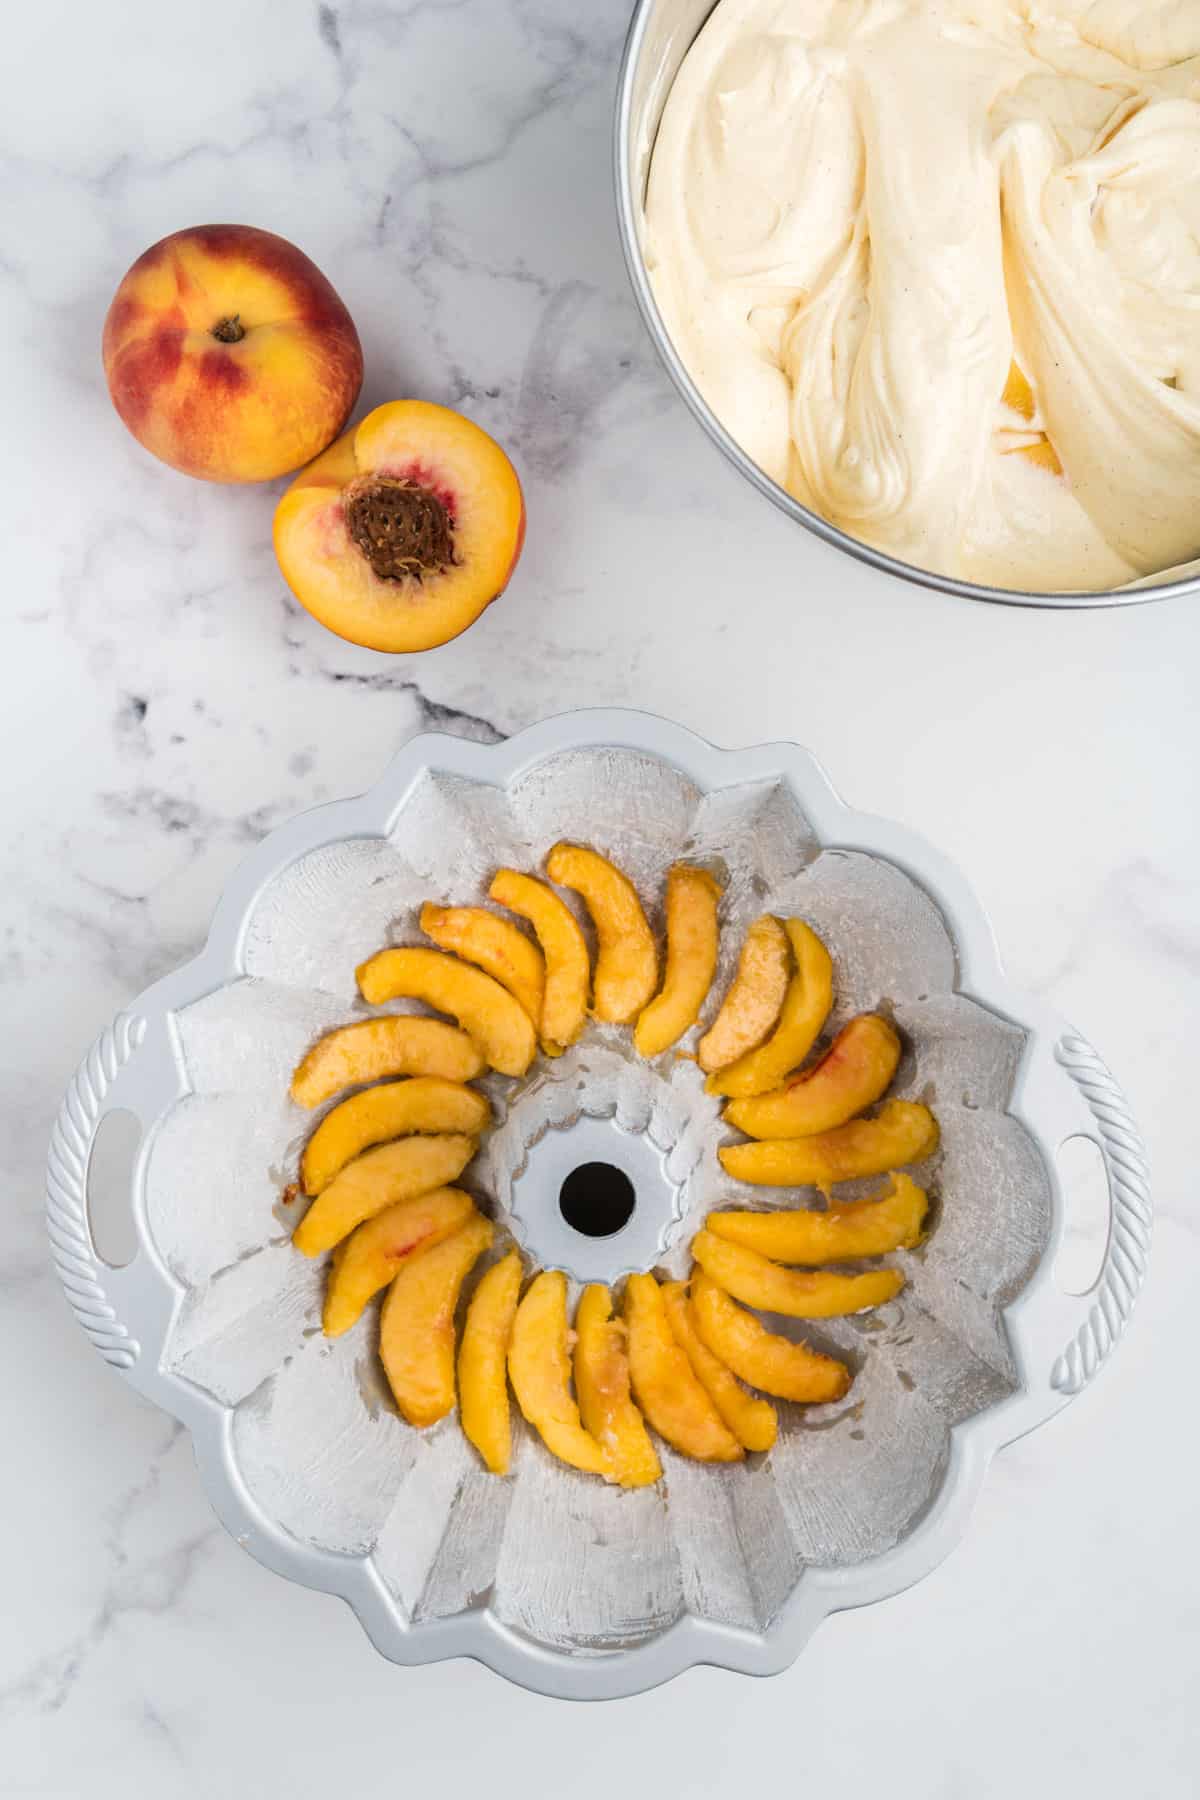 Fresh peach slices layered inside of a greased bundt pan.